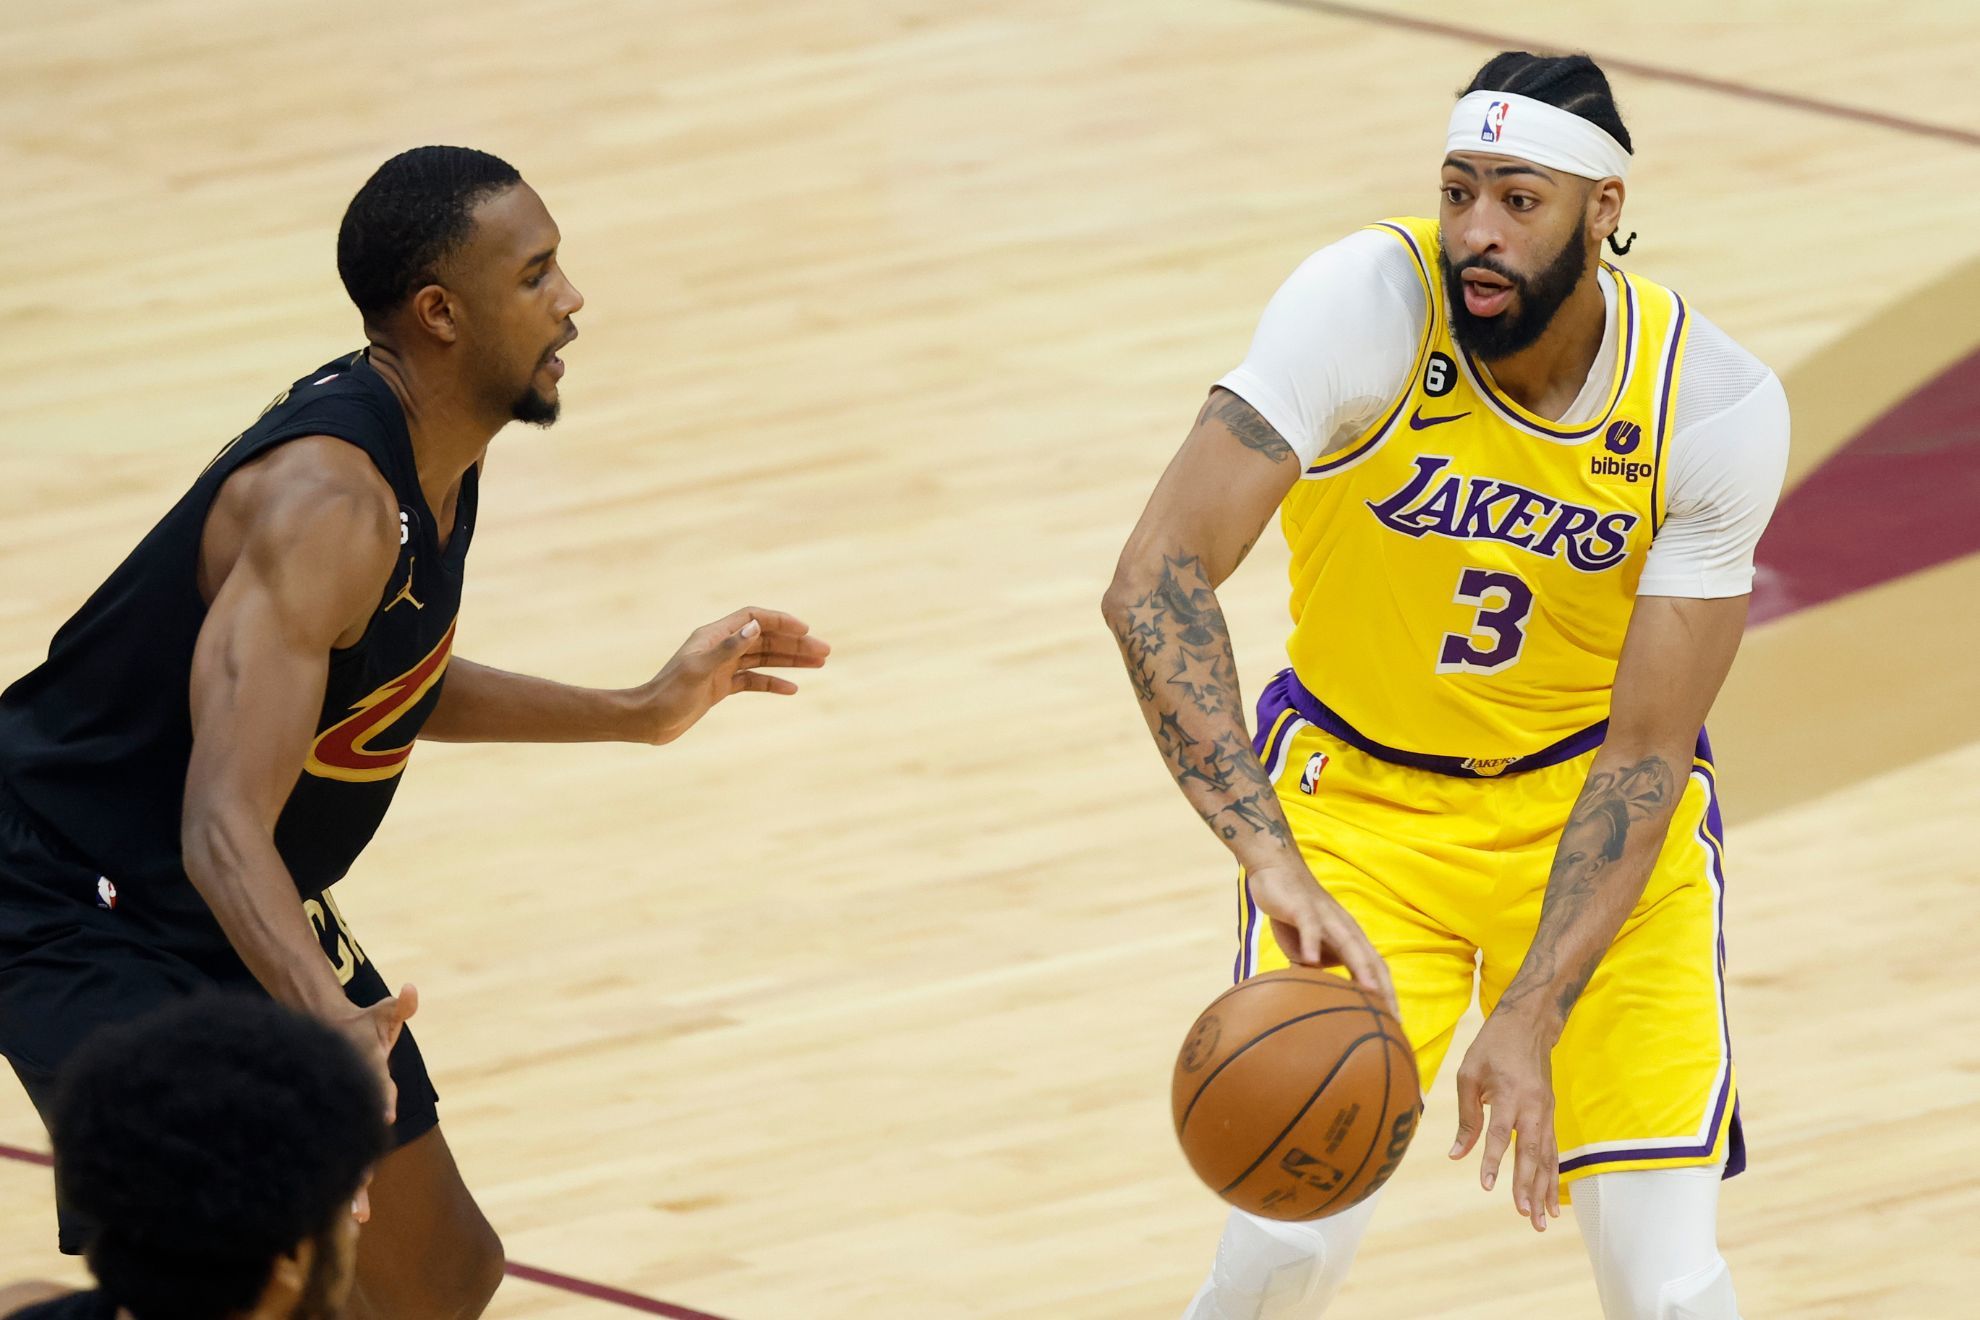 Los Angeles Lakers forward Anthony Davis (3) passes the ball past Cleveland Cavaliers forward Evan Mobley during the first half of an NBA basketball game, Tuesday, Dec. 6, 2022, in Cleveland.